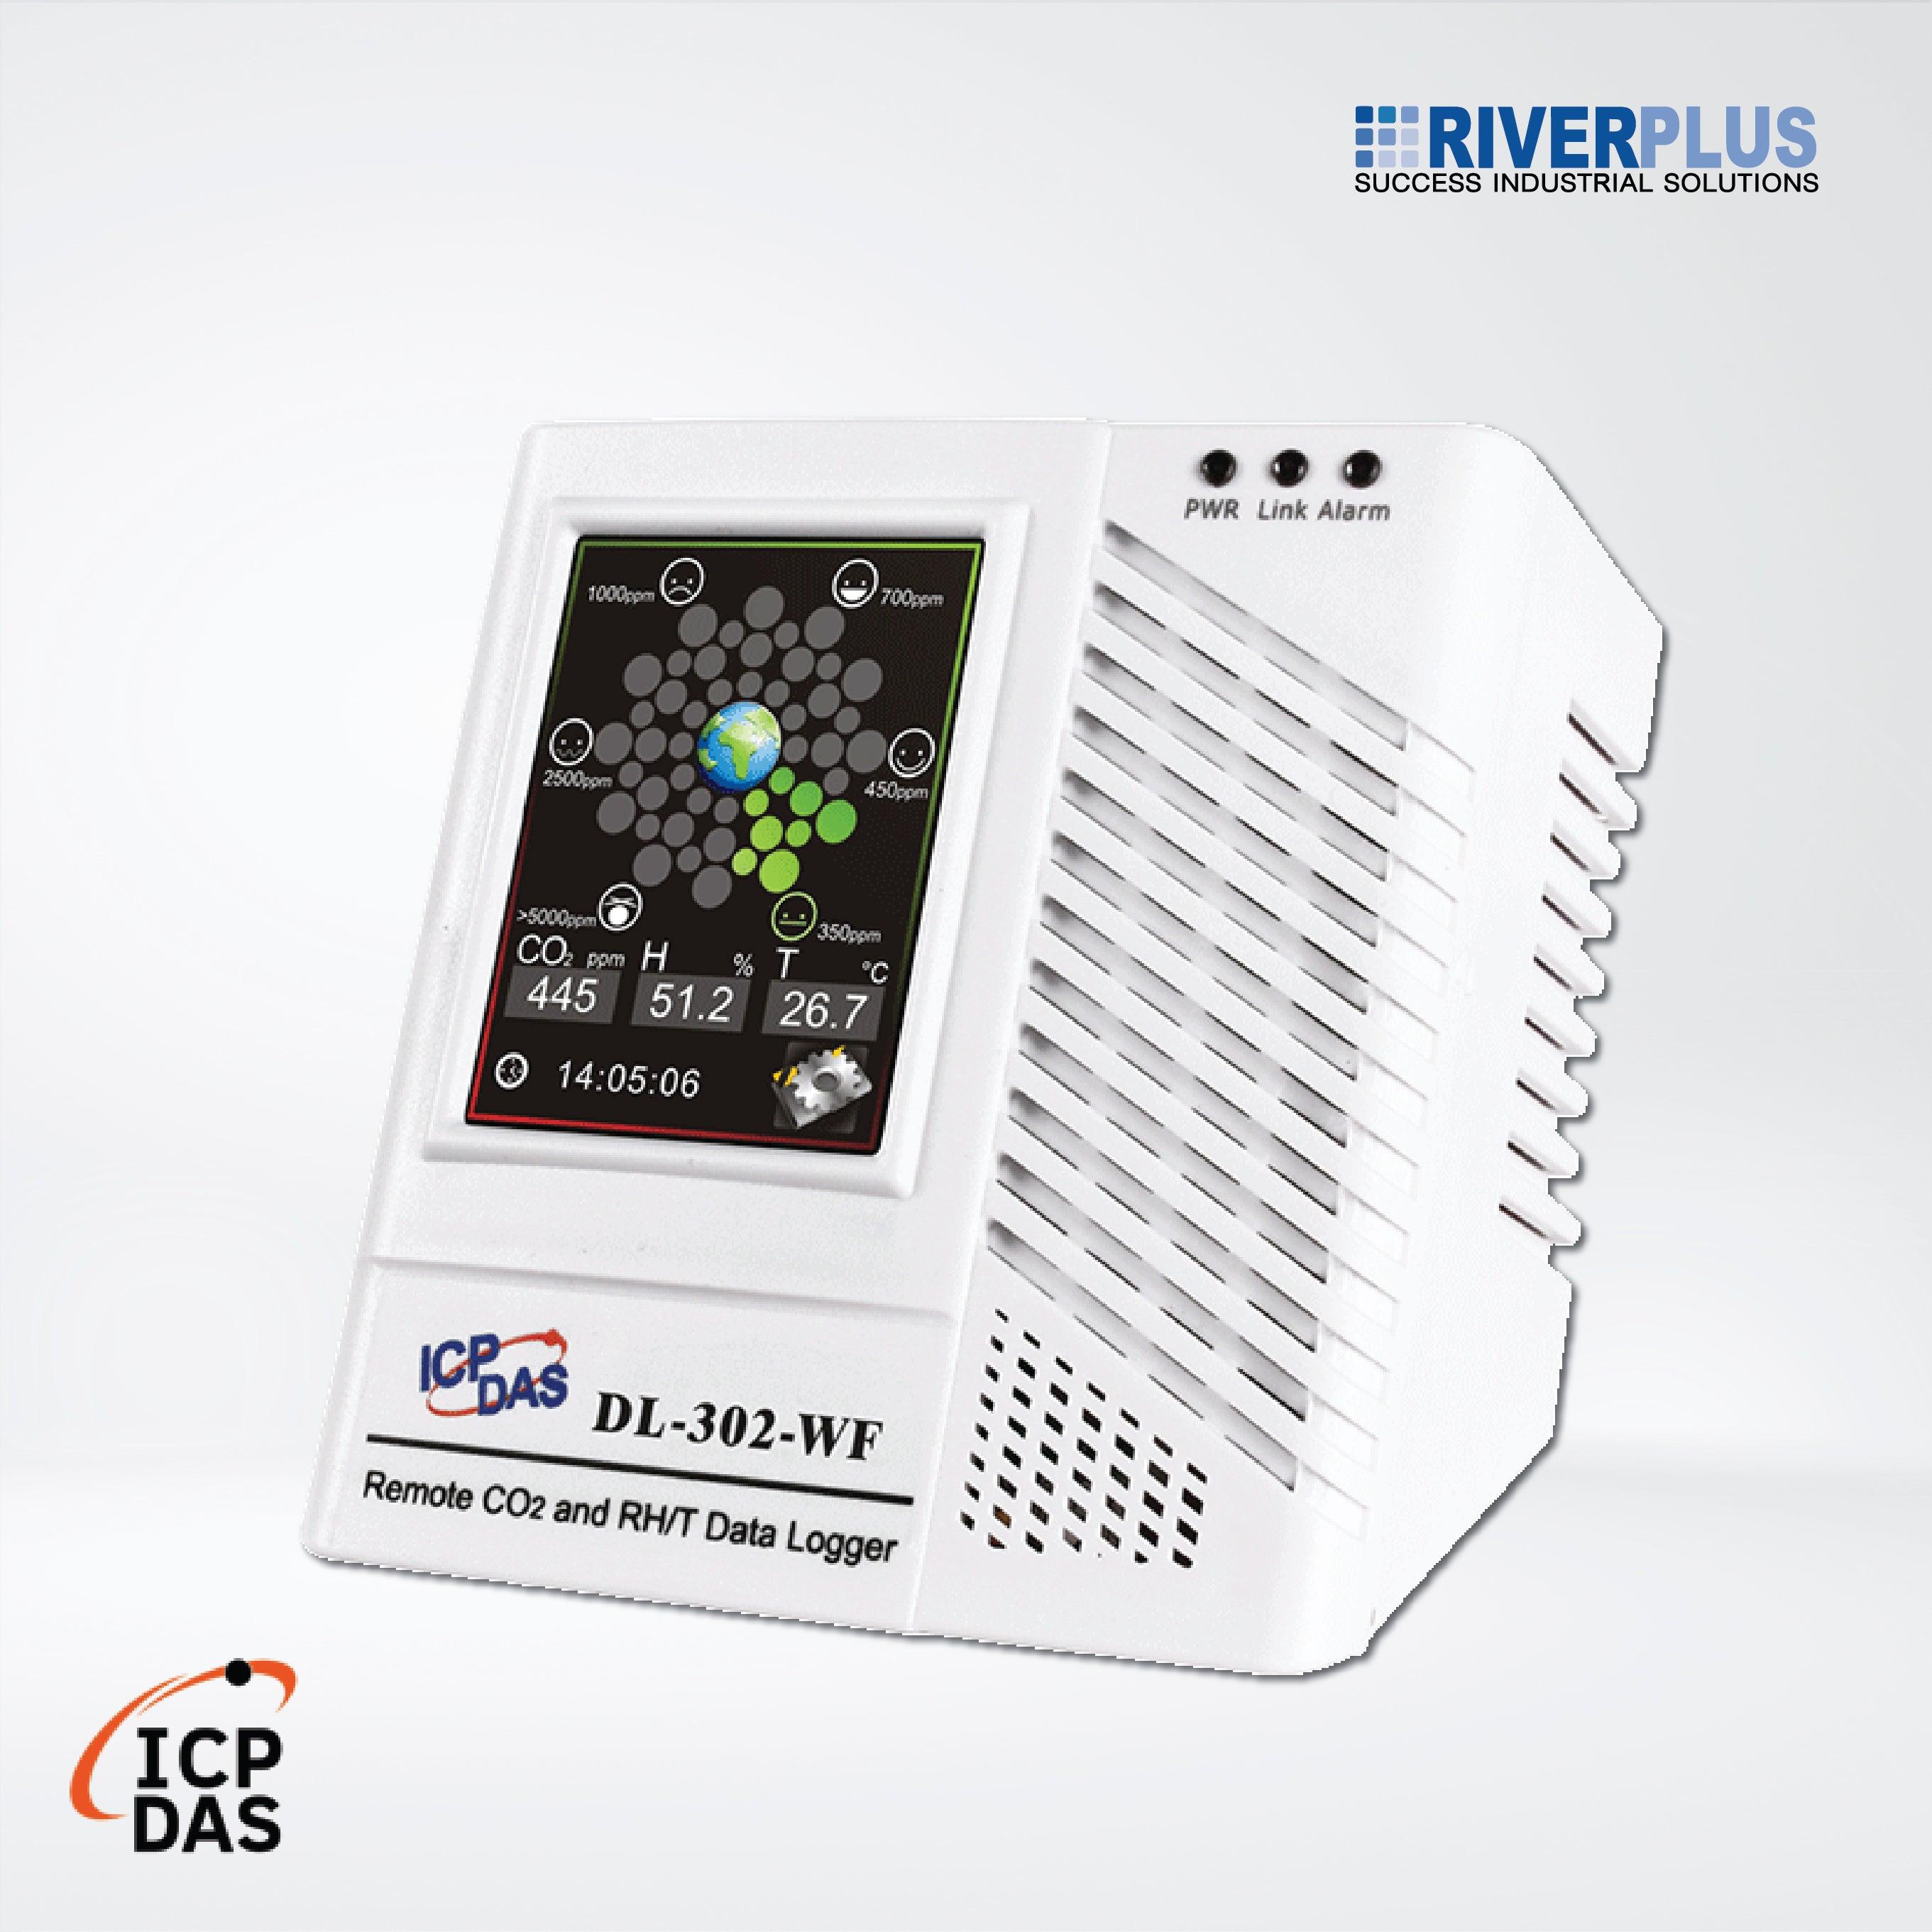 DL-302-WF Remote CO2/Temperature/Humidity/Dew Point Data Logger - Riverplus